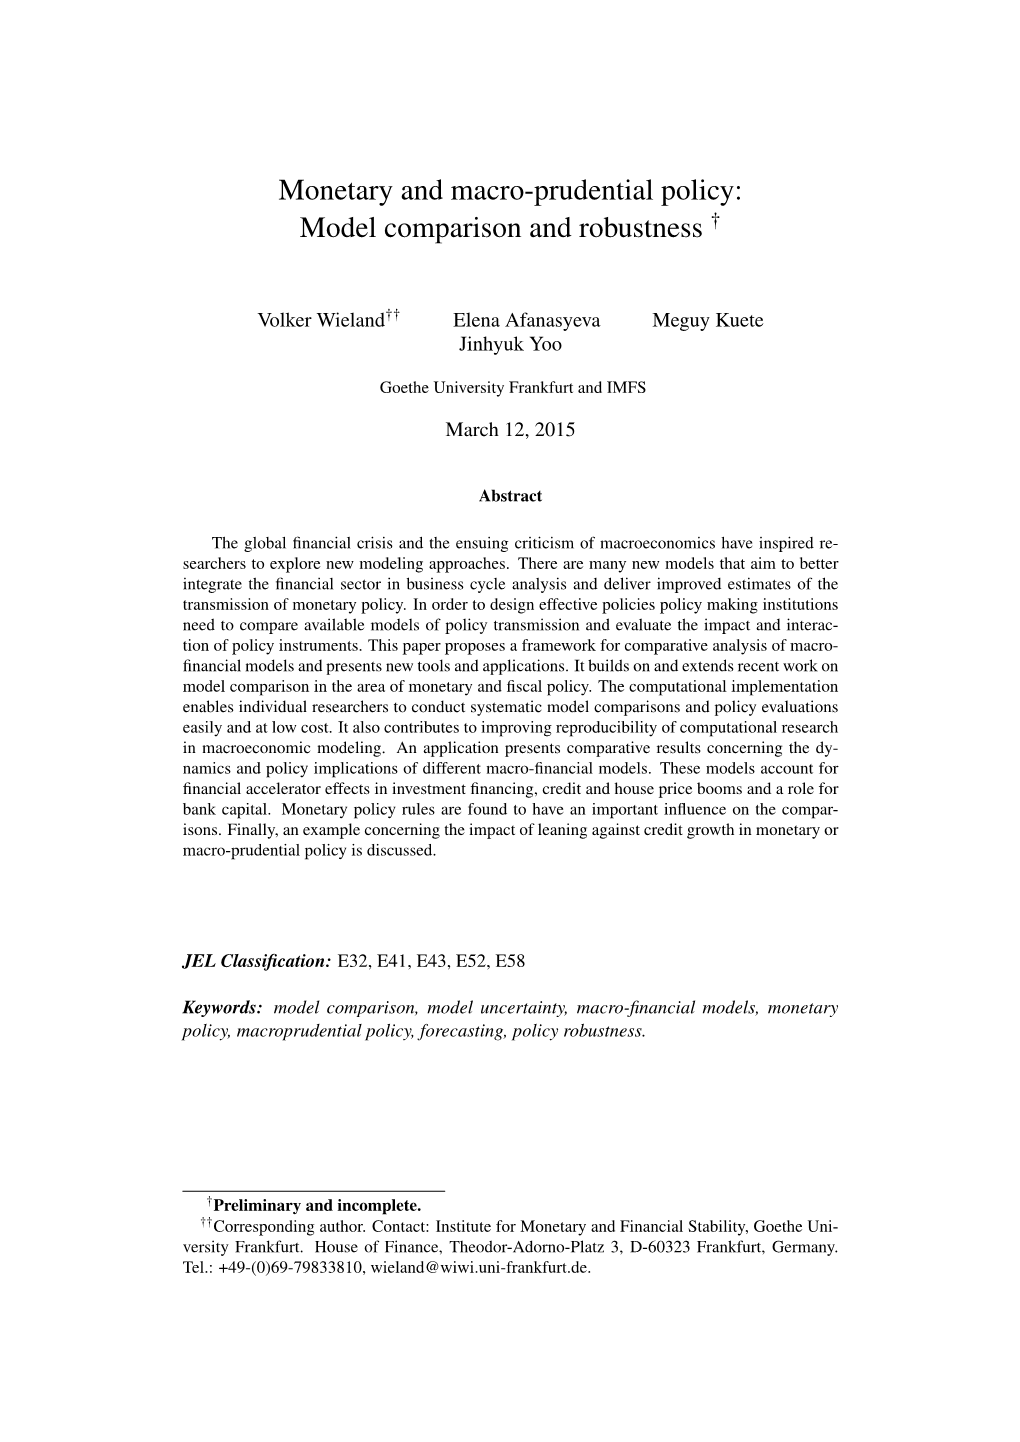 Monetary and Macro-Prudential Policy: Model Comparison and Robustness †